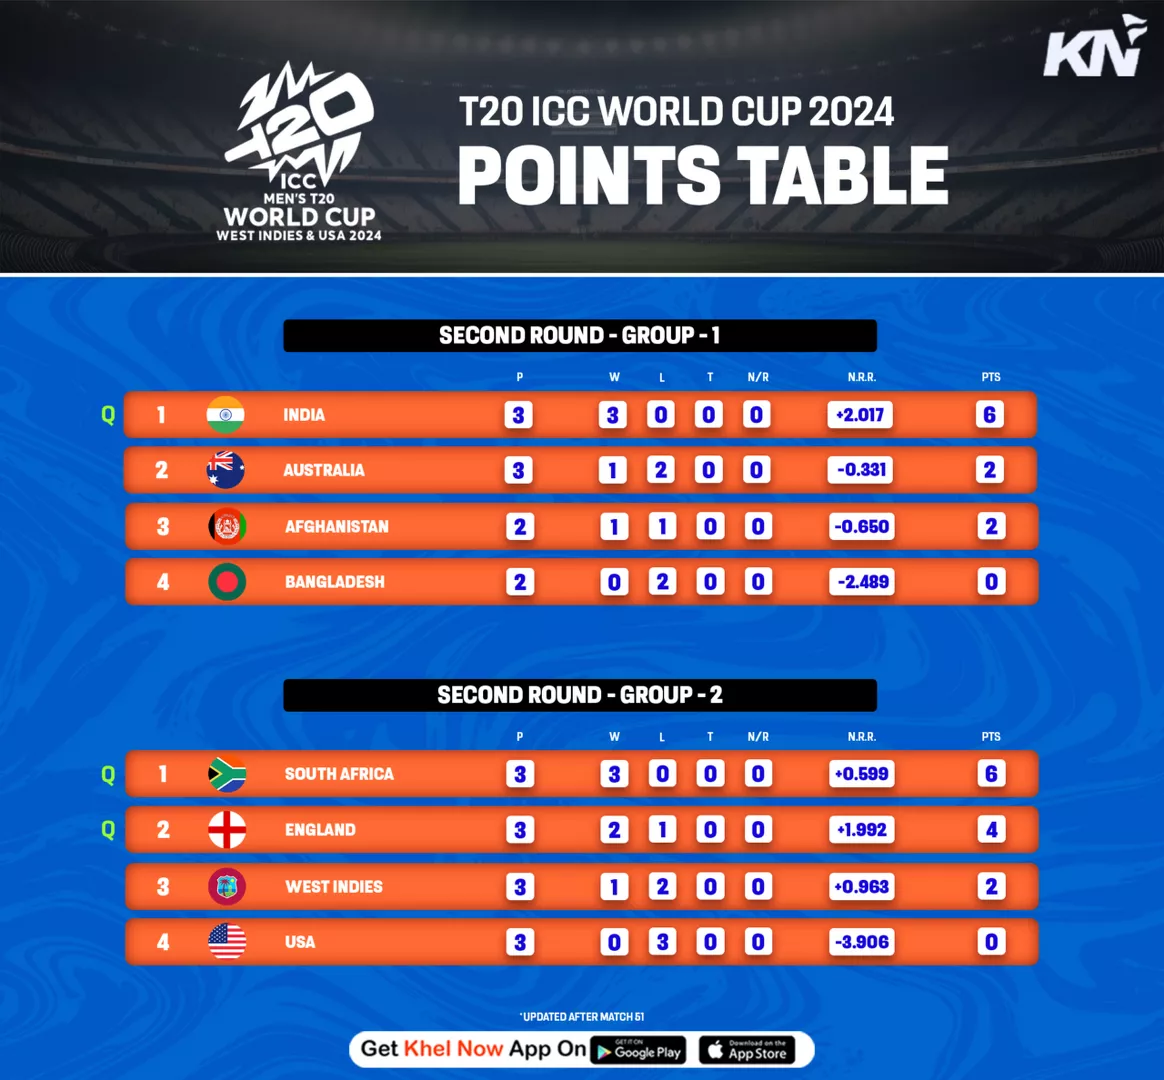 ICC T20 World Cup Super 8 standings after match 51, Australia vs India